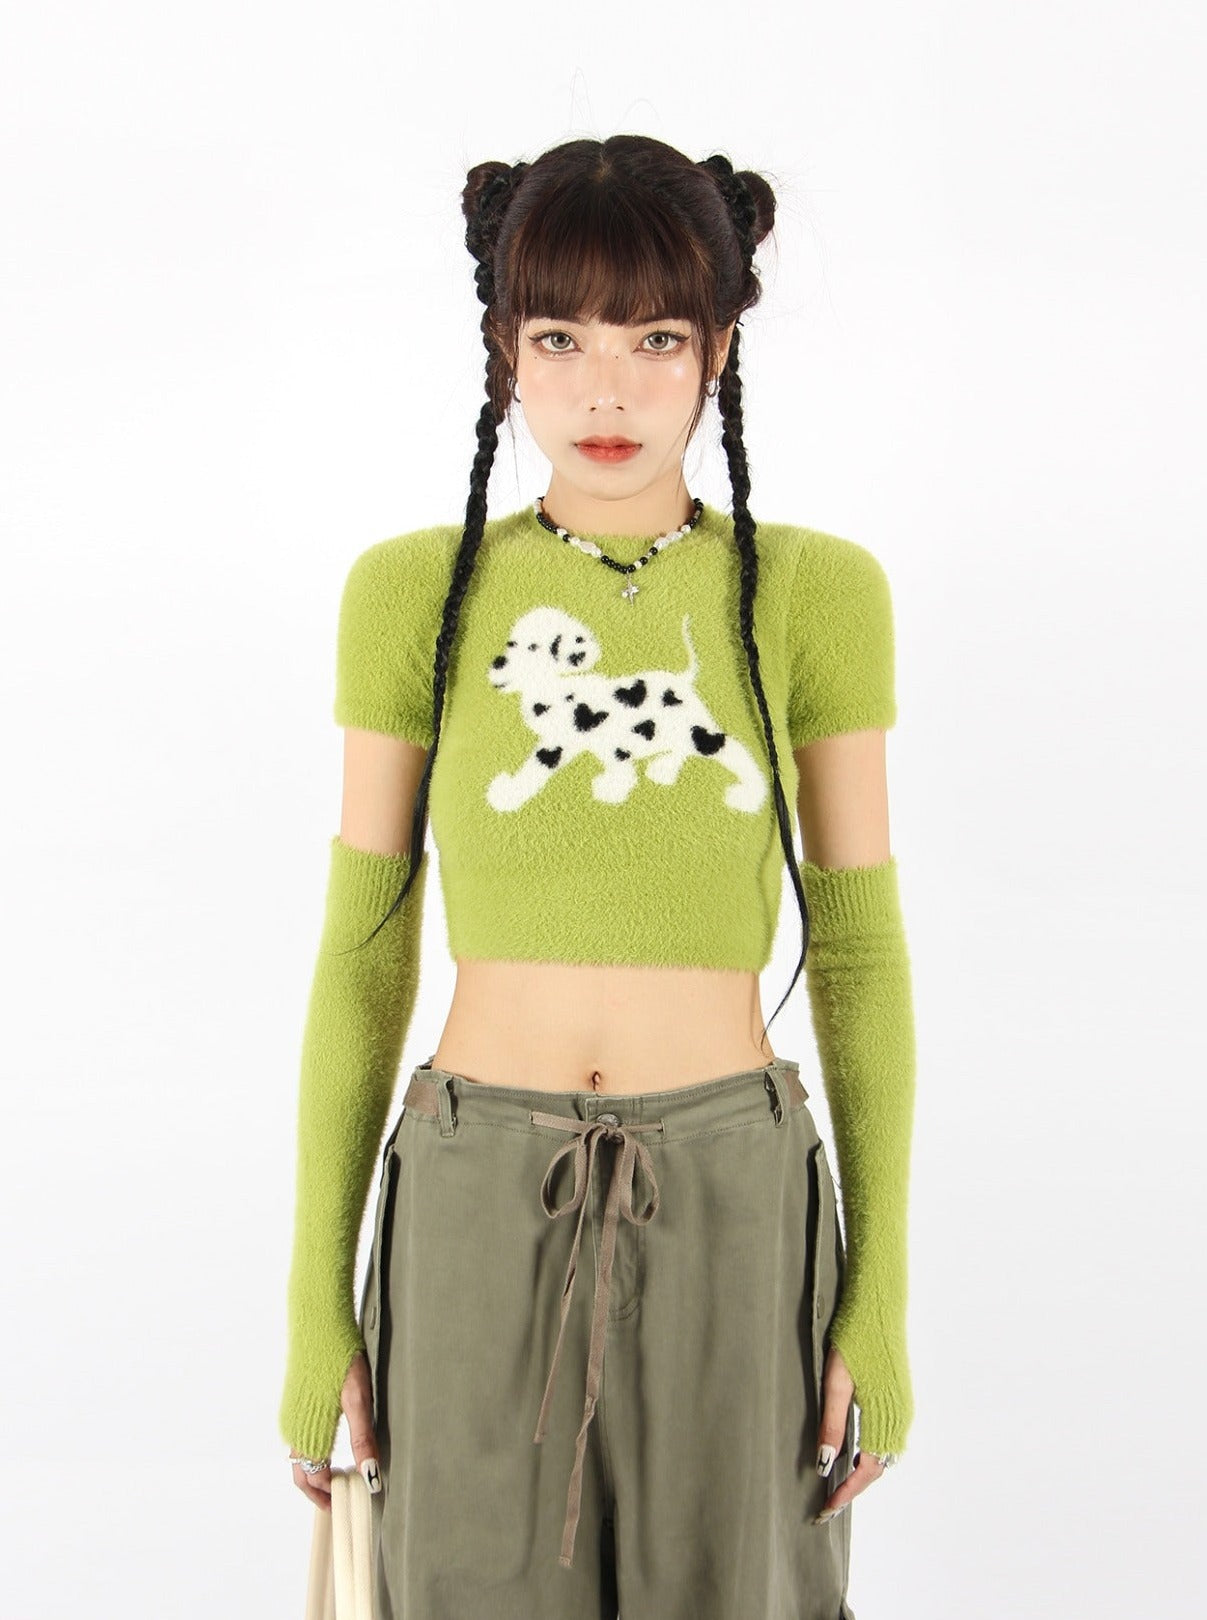 Dalmatian Knit Crop Top with Sleeves